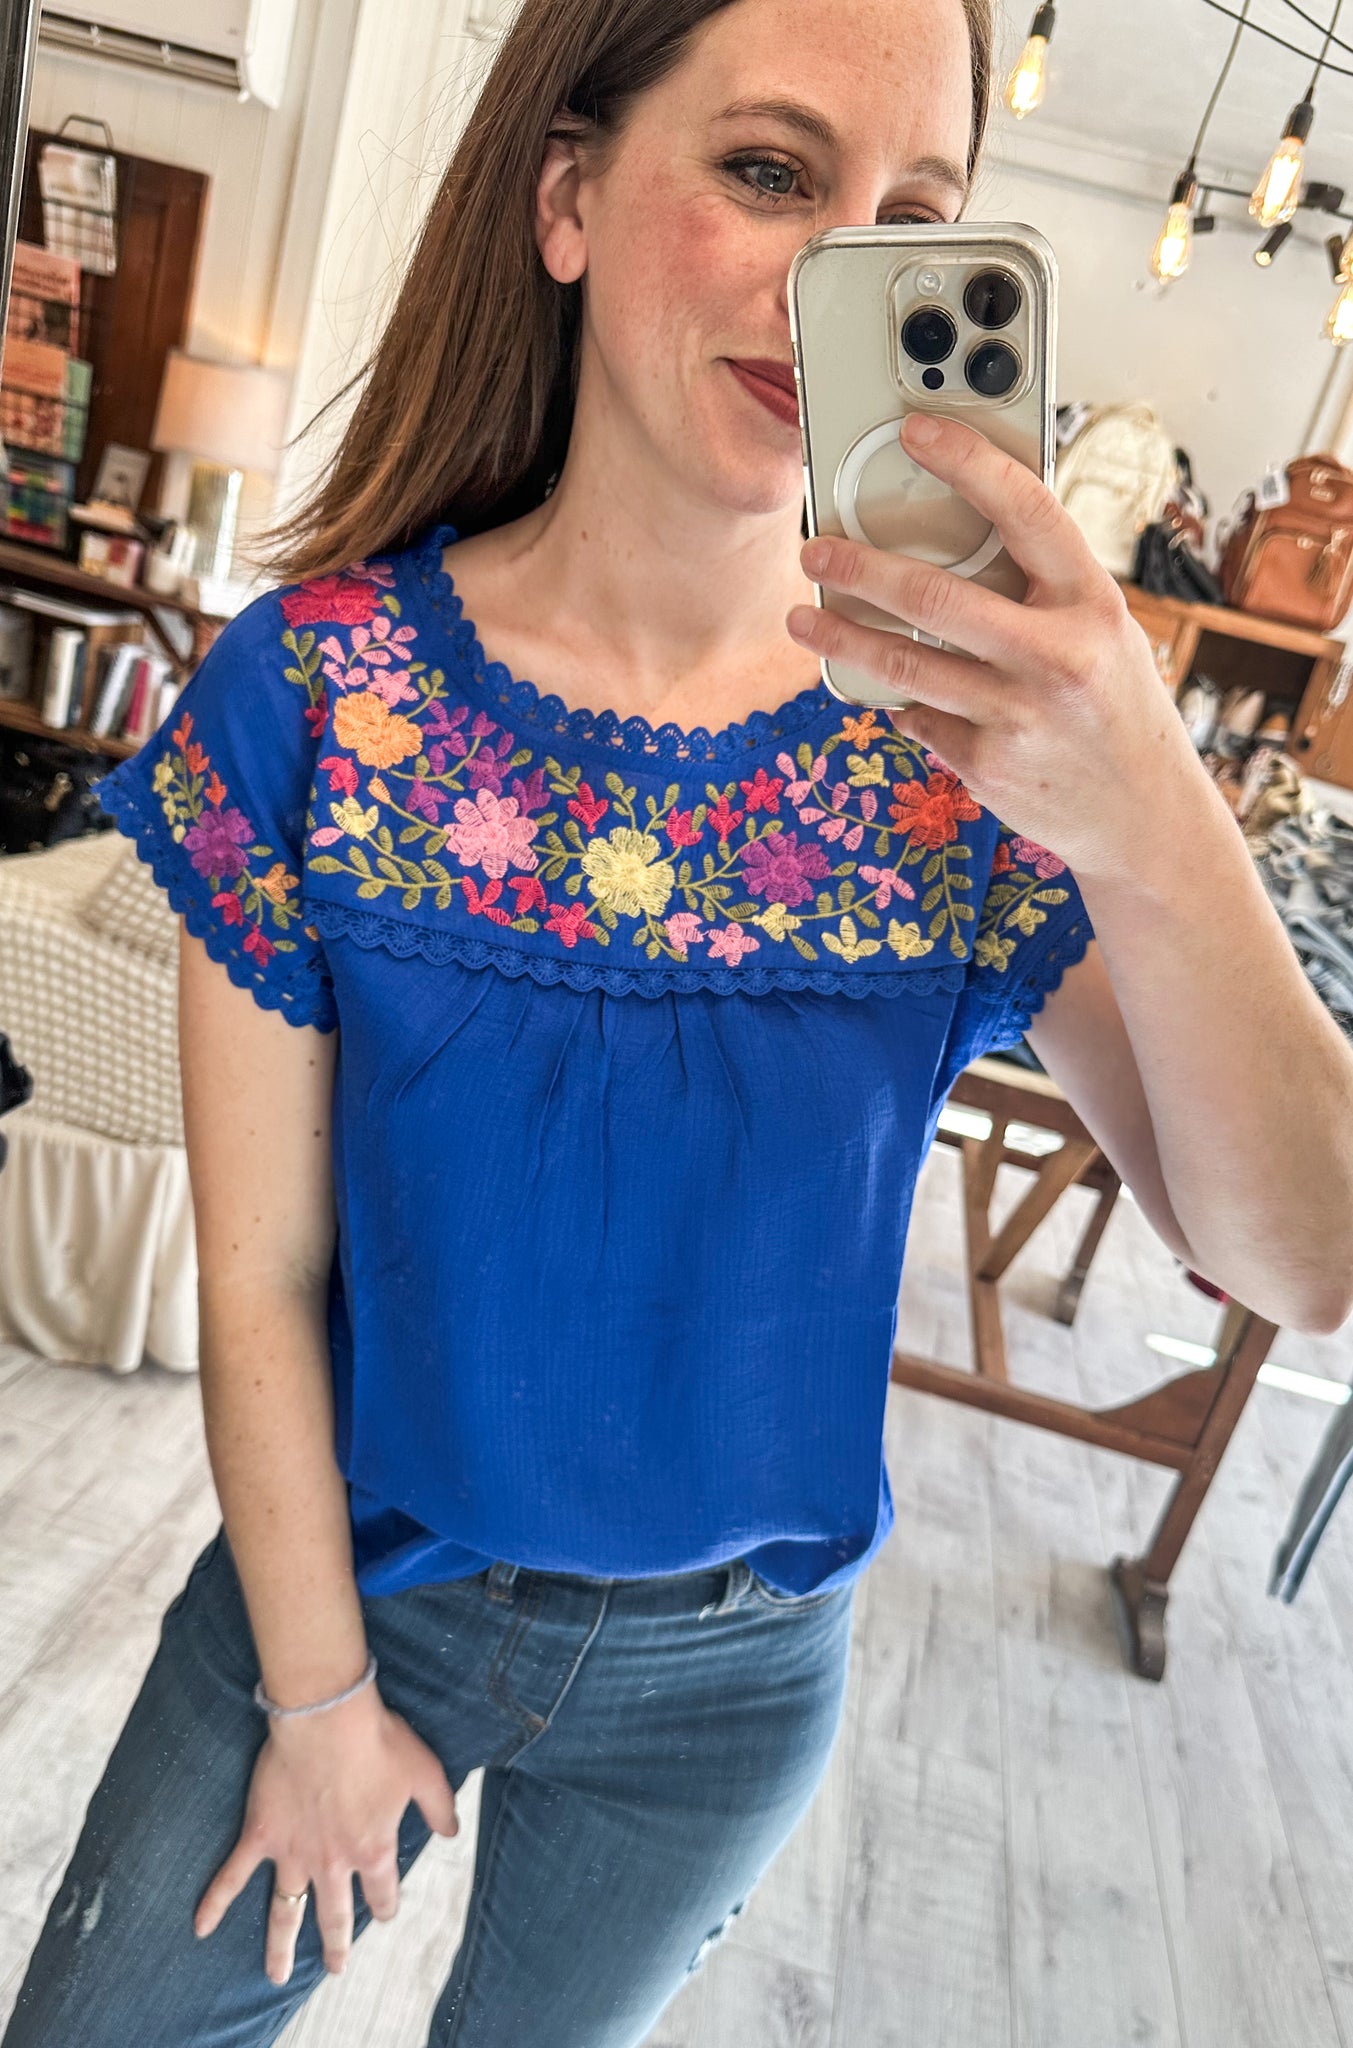 Seas the Day Floral Embroidery Scallop Lace Blouse in Royal Blue